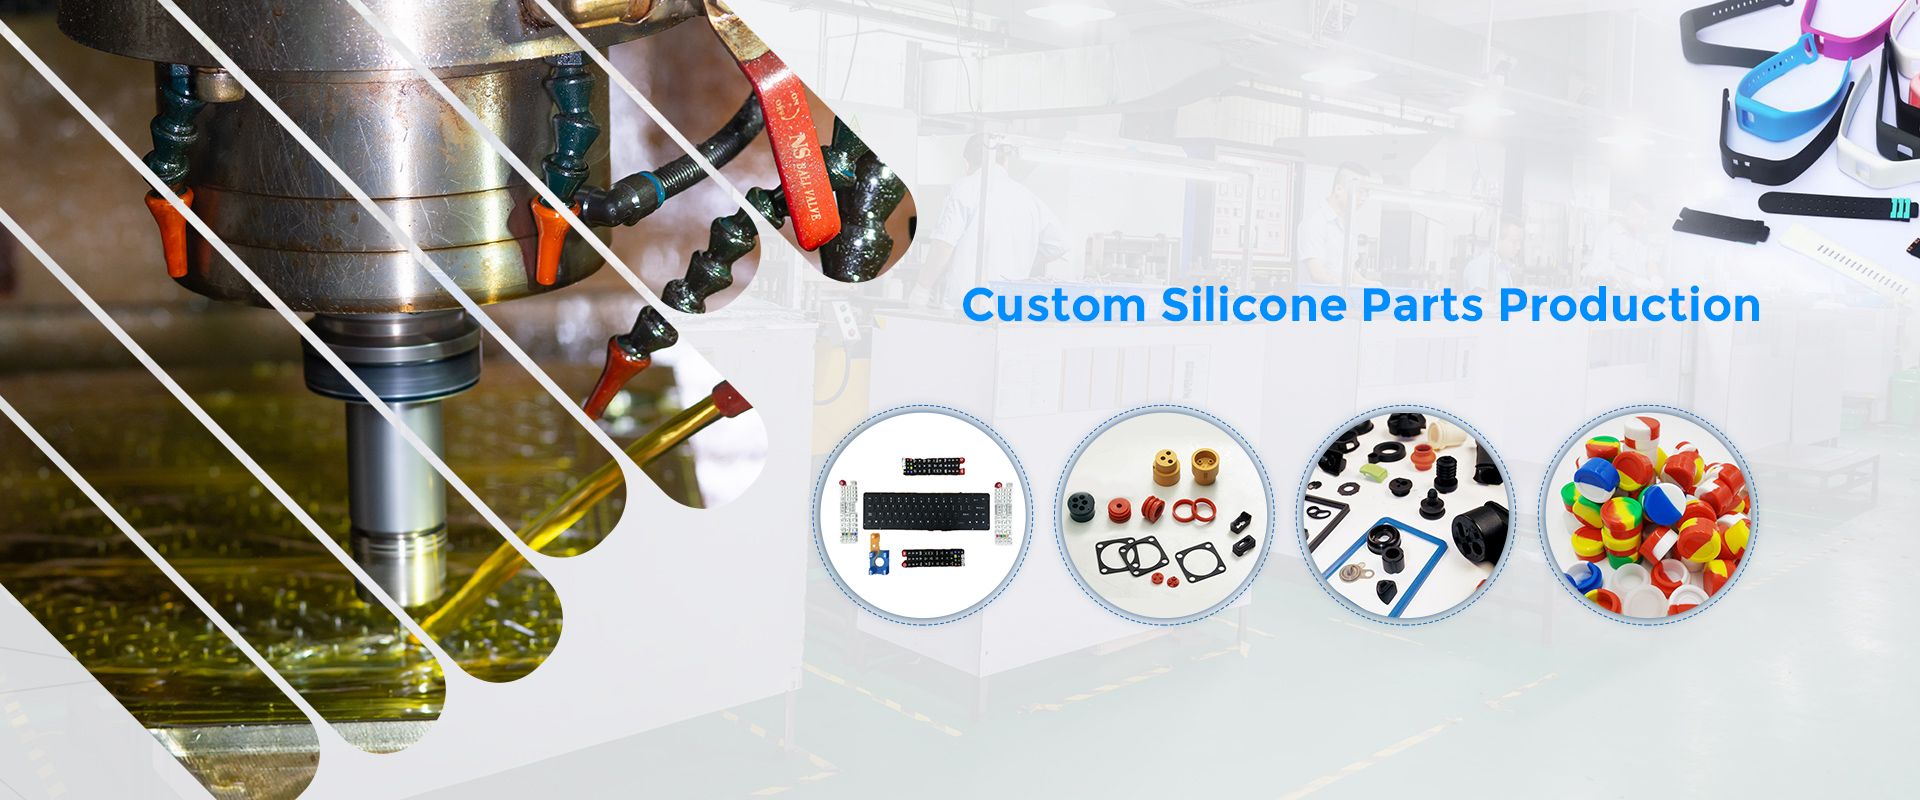 Custom Silicone Parts Production